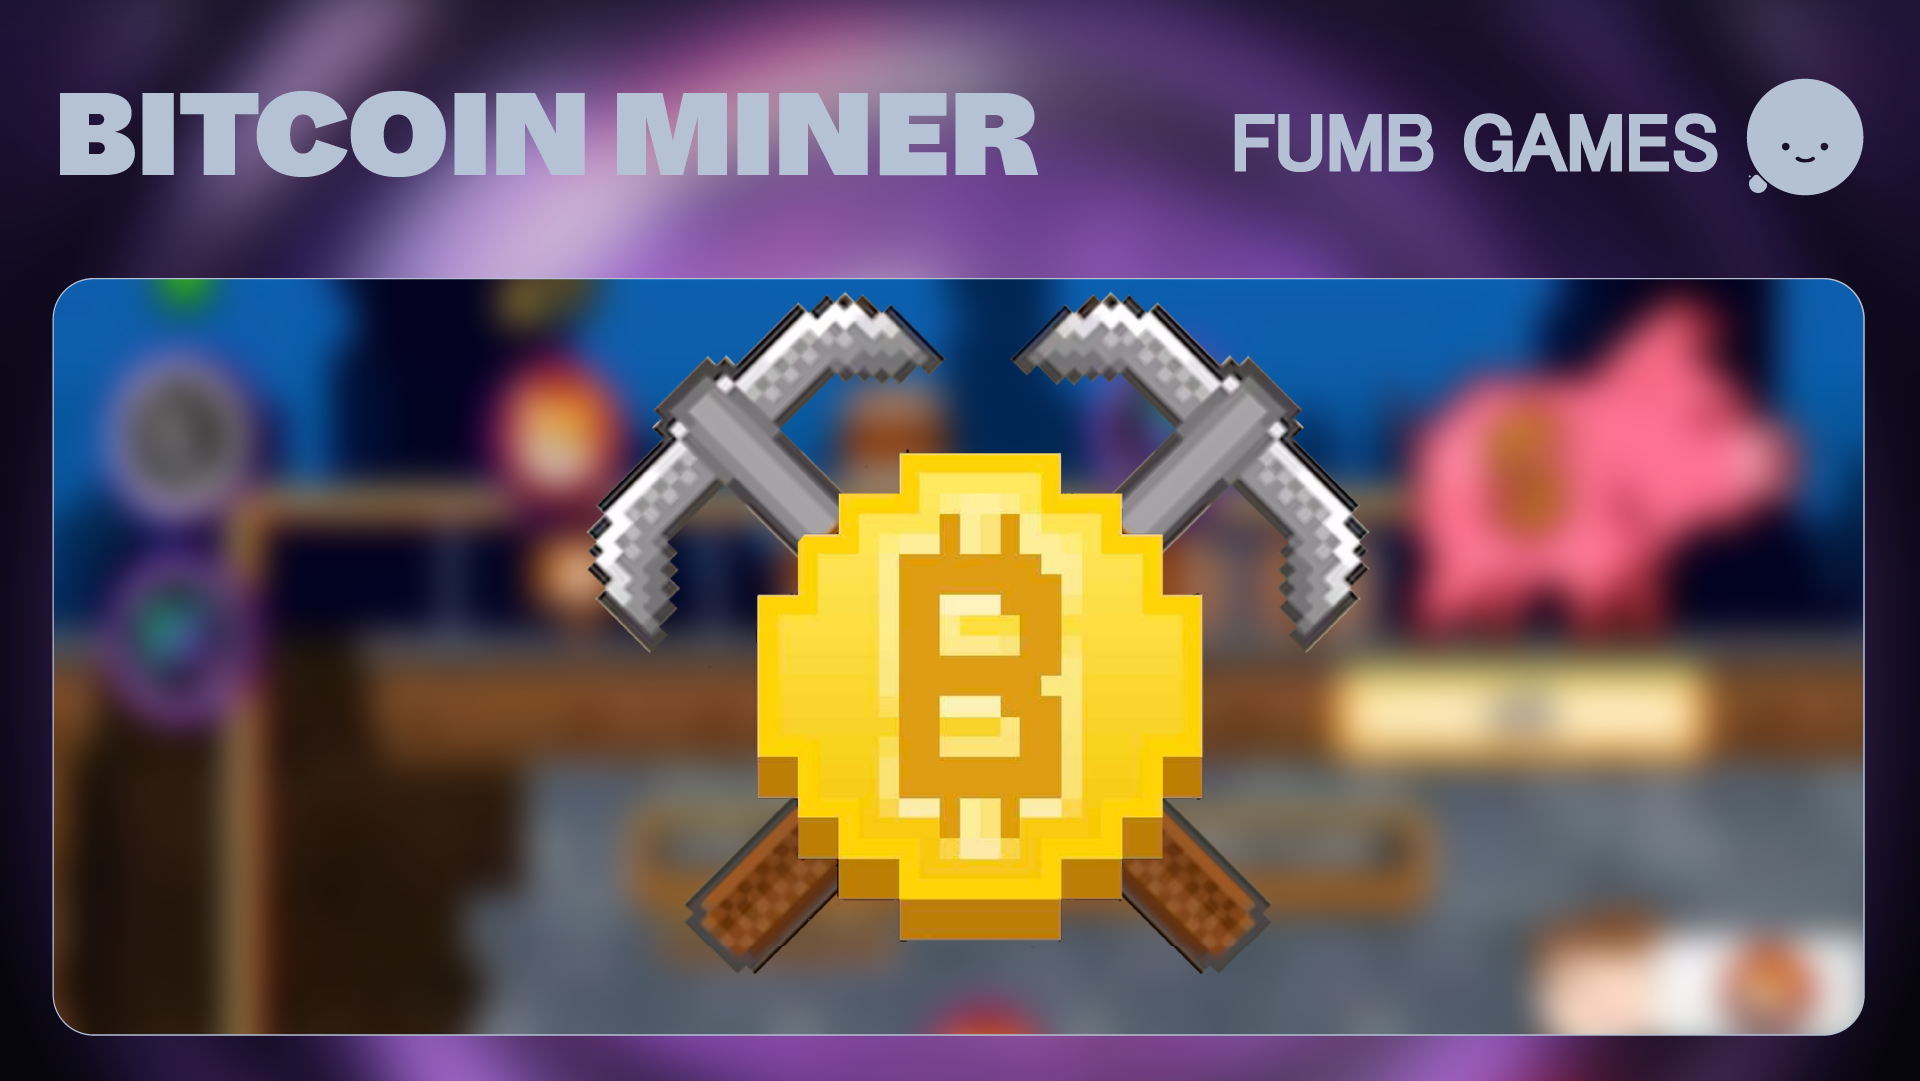 Bitcoin Miner Game Surpassed One Million Players